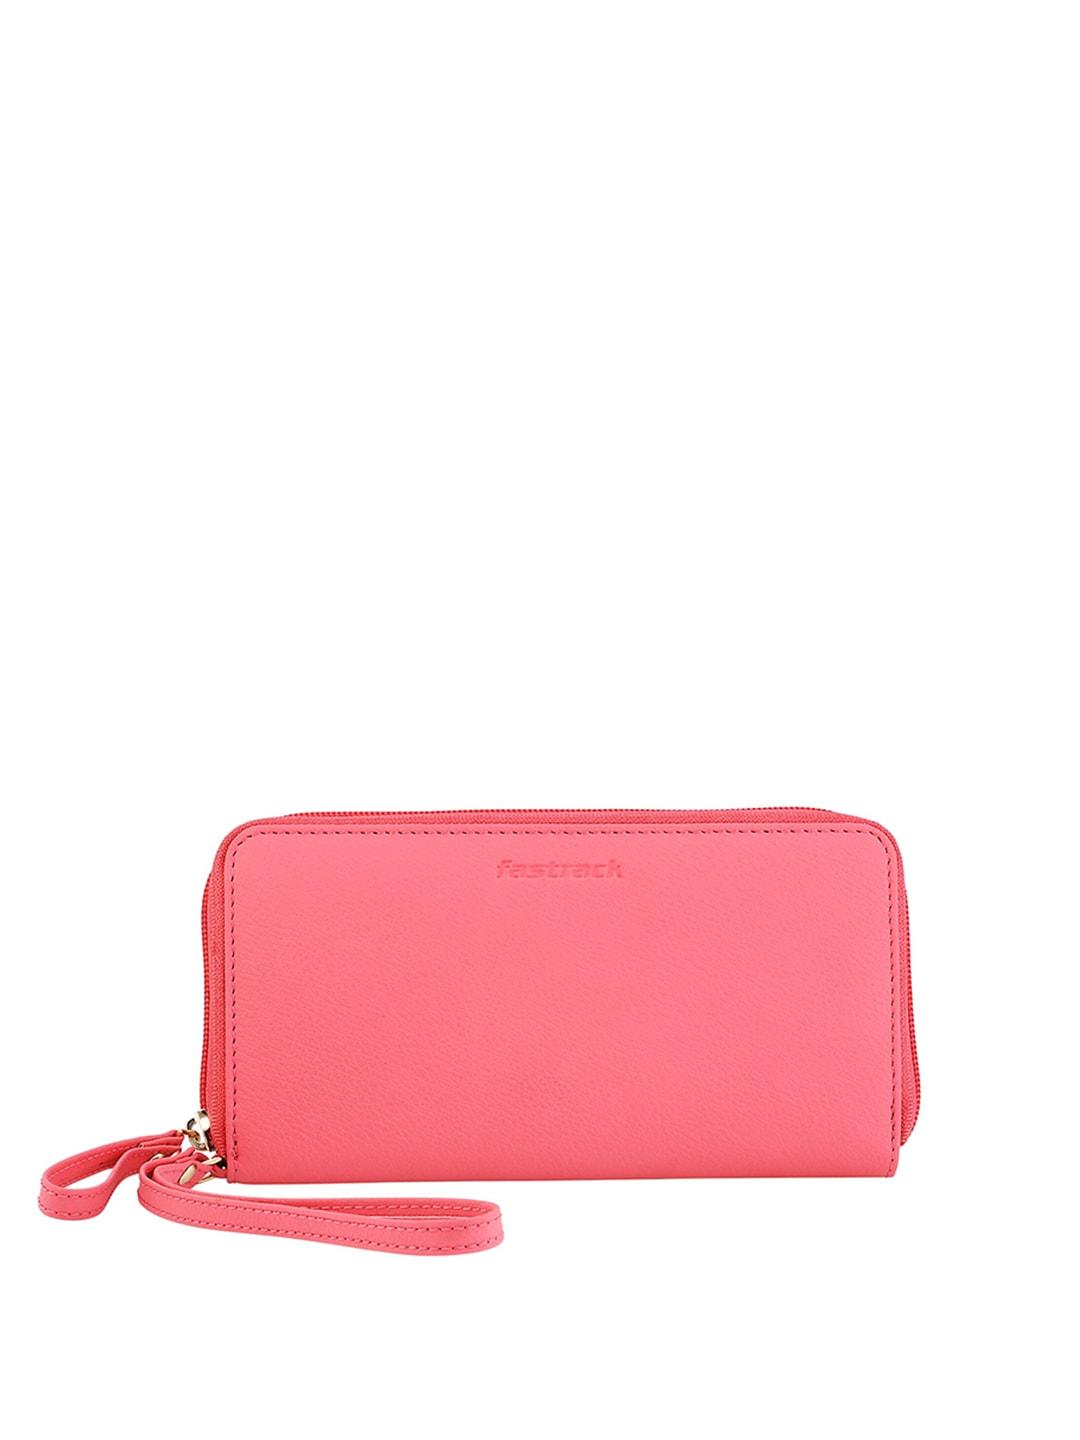 fastrack pu purse clutch with zip detail